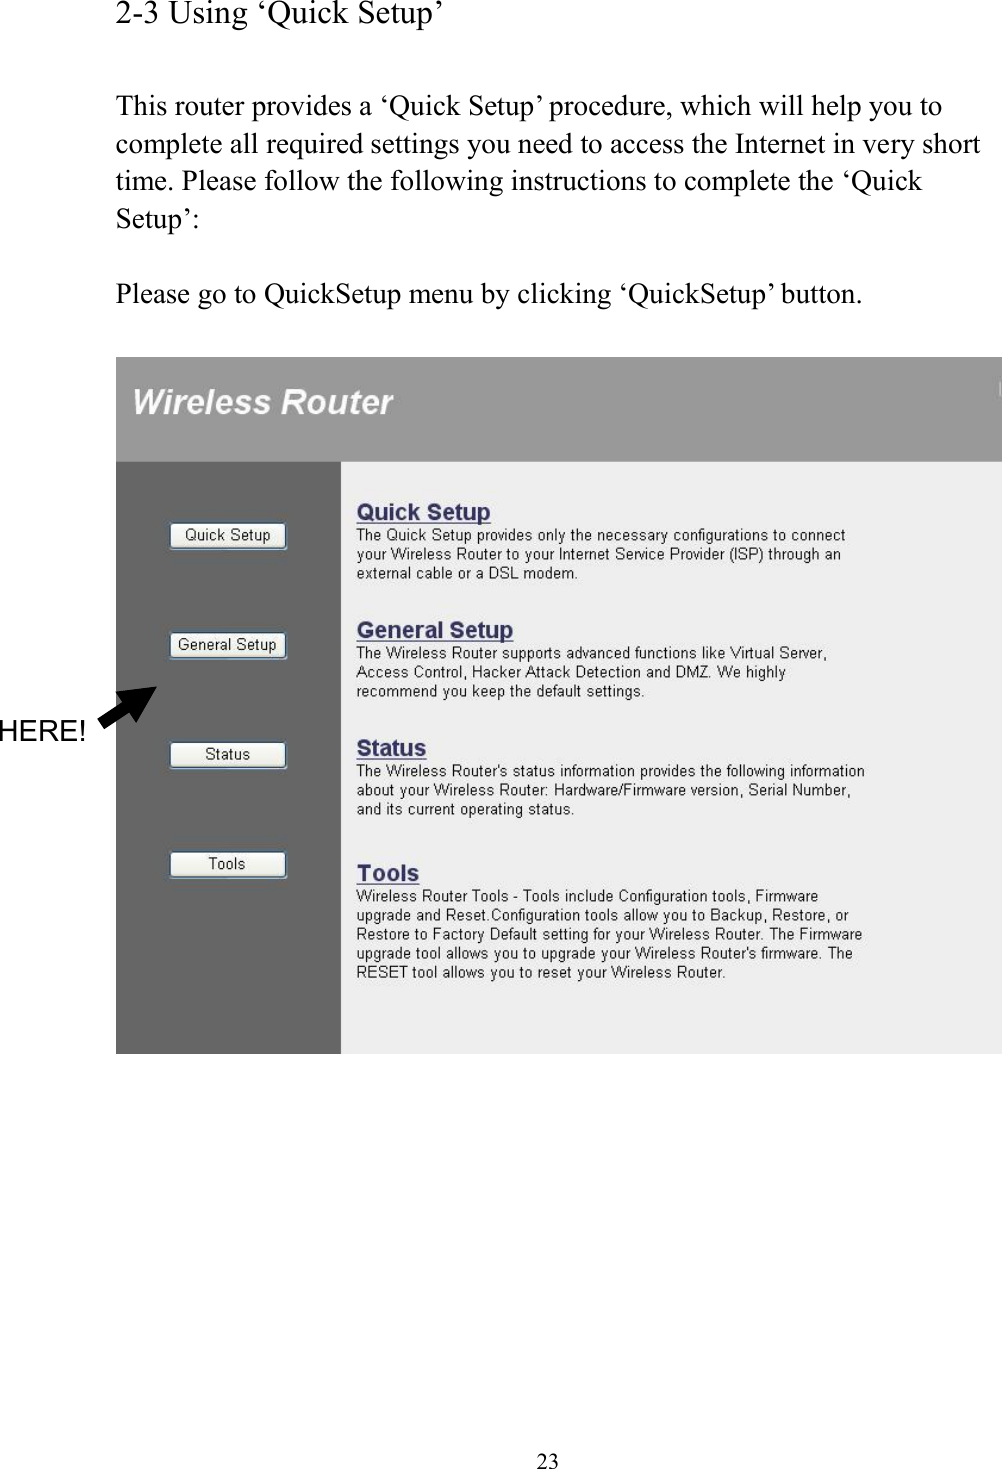 23 2-3 Using ‘Quick Setup’  This router provides a ‘Quick Setup’ procedure, which will help you to complete all required settings you need to access the Internet in very short time. Please follow the following instructions to complete the ‘Quick Setup’:  Please go to QuickSetup menu by clicking ‘QuickSetup’ button.            HERE! 